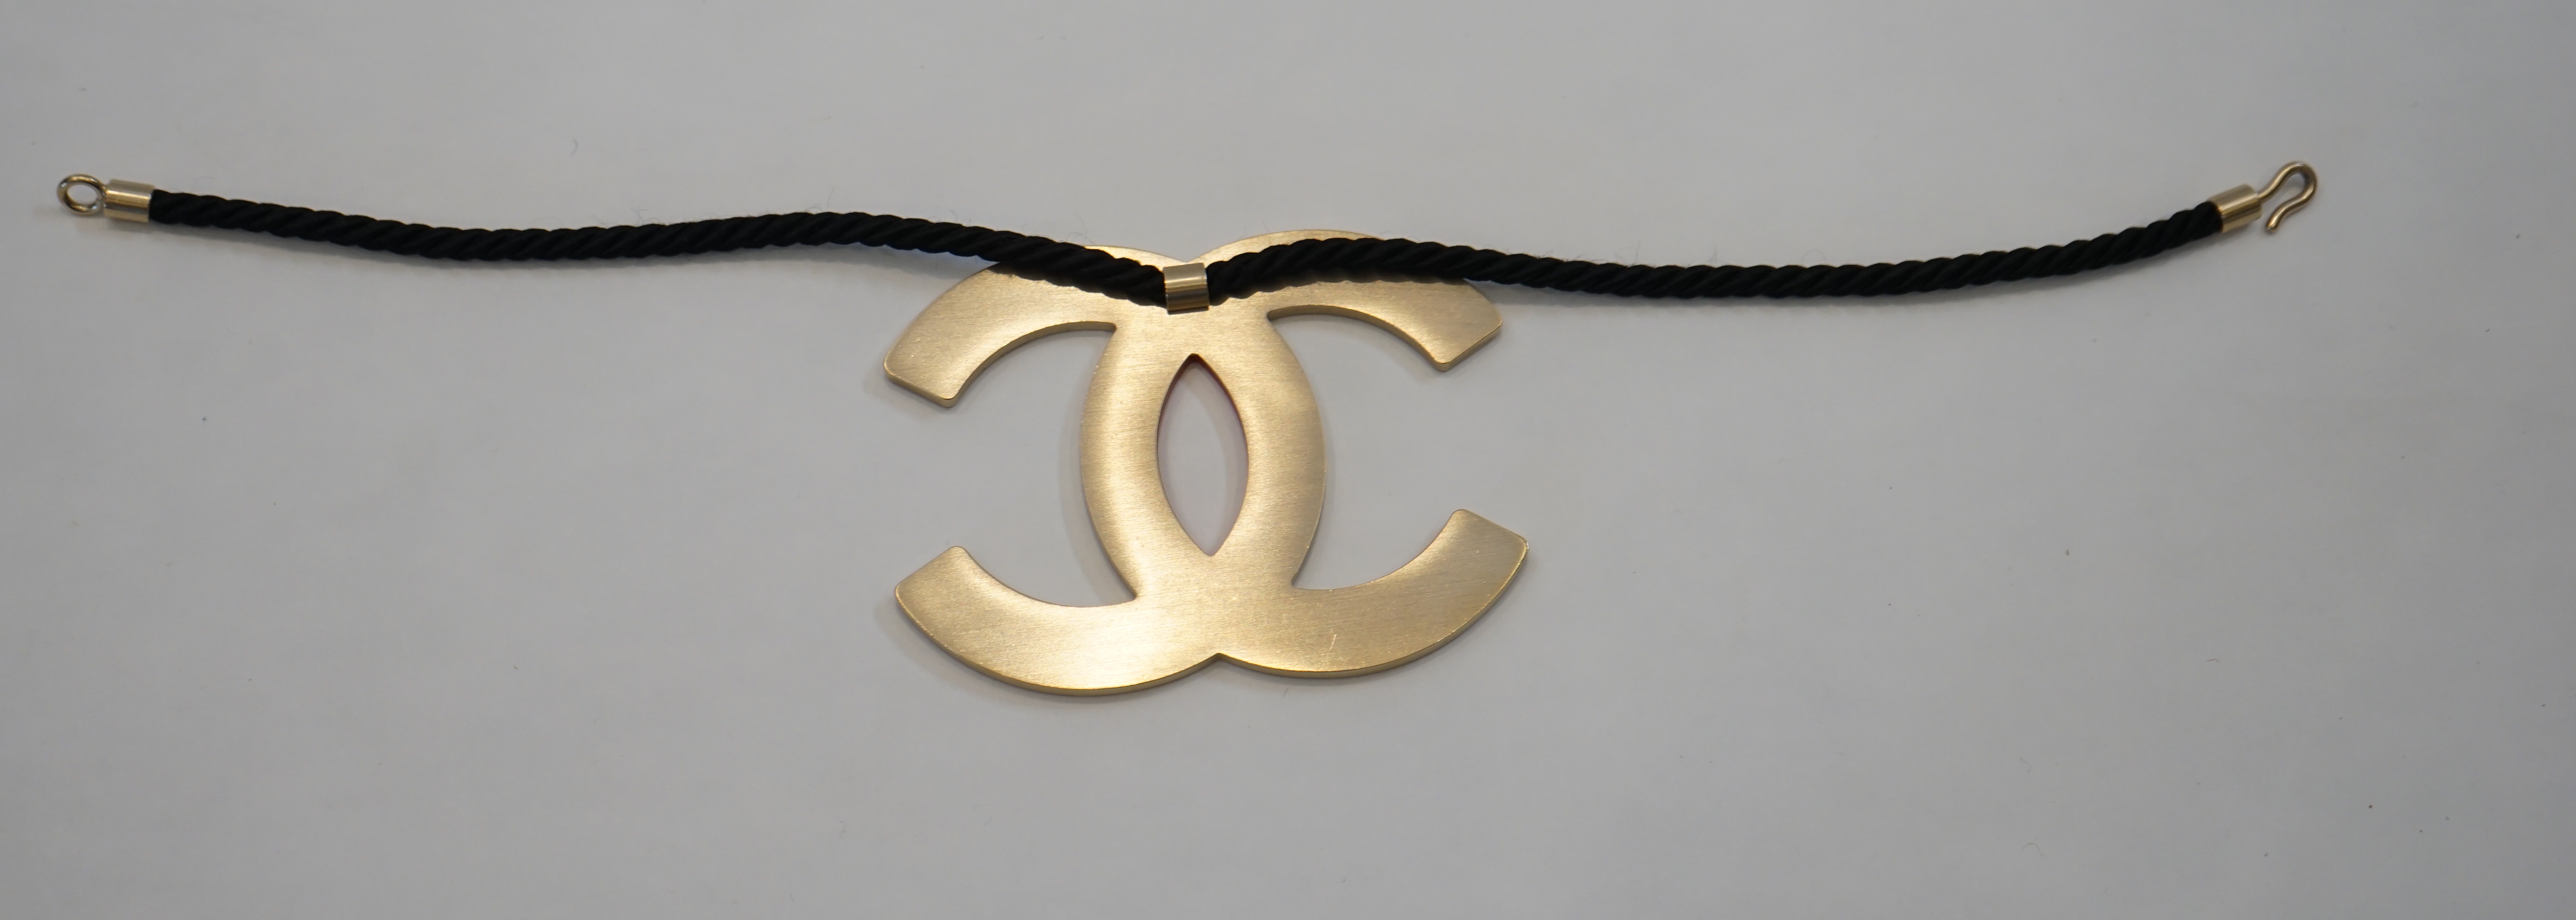 A Chanel CC red metal enamel and gold hardware fabric large choker evening necklace, cord length 39.5cm, charm width 10.75cm, height 8.25cm